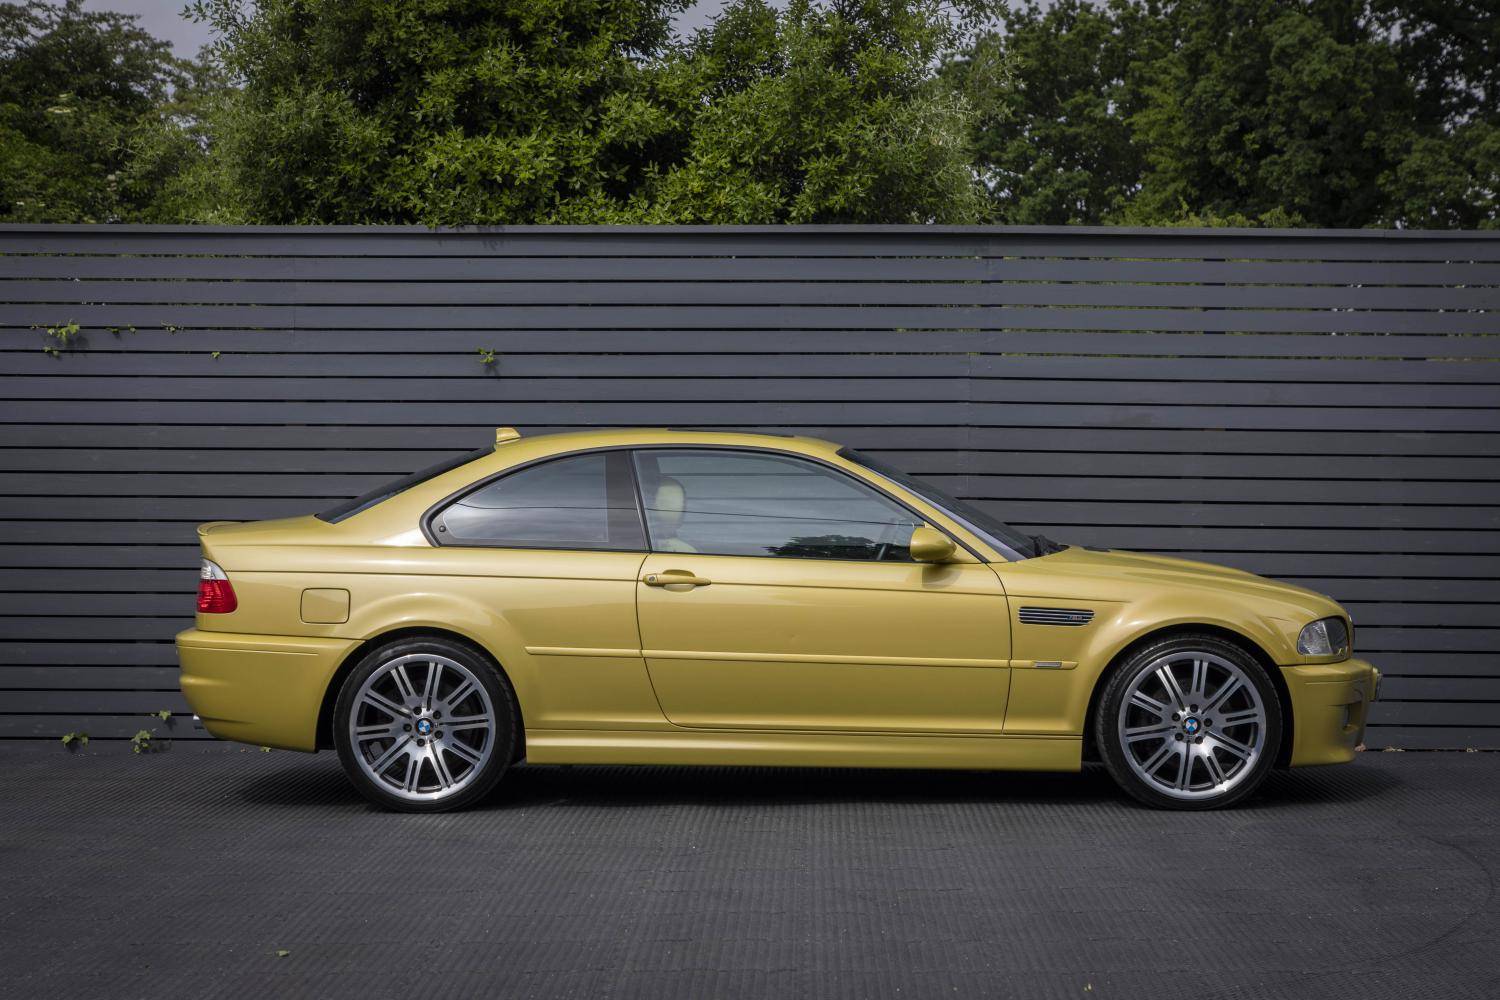 For Sale: BMW M3 (2003) offered for GBP 33,995